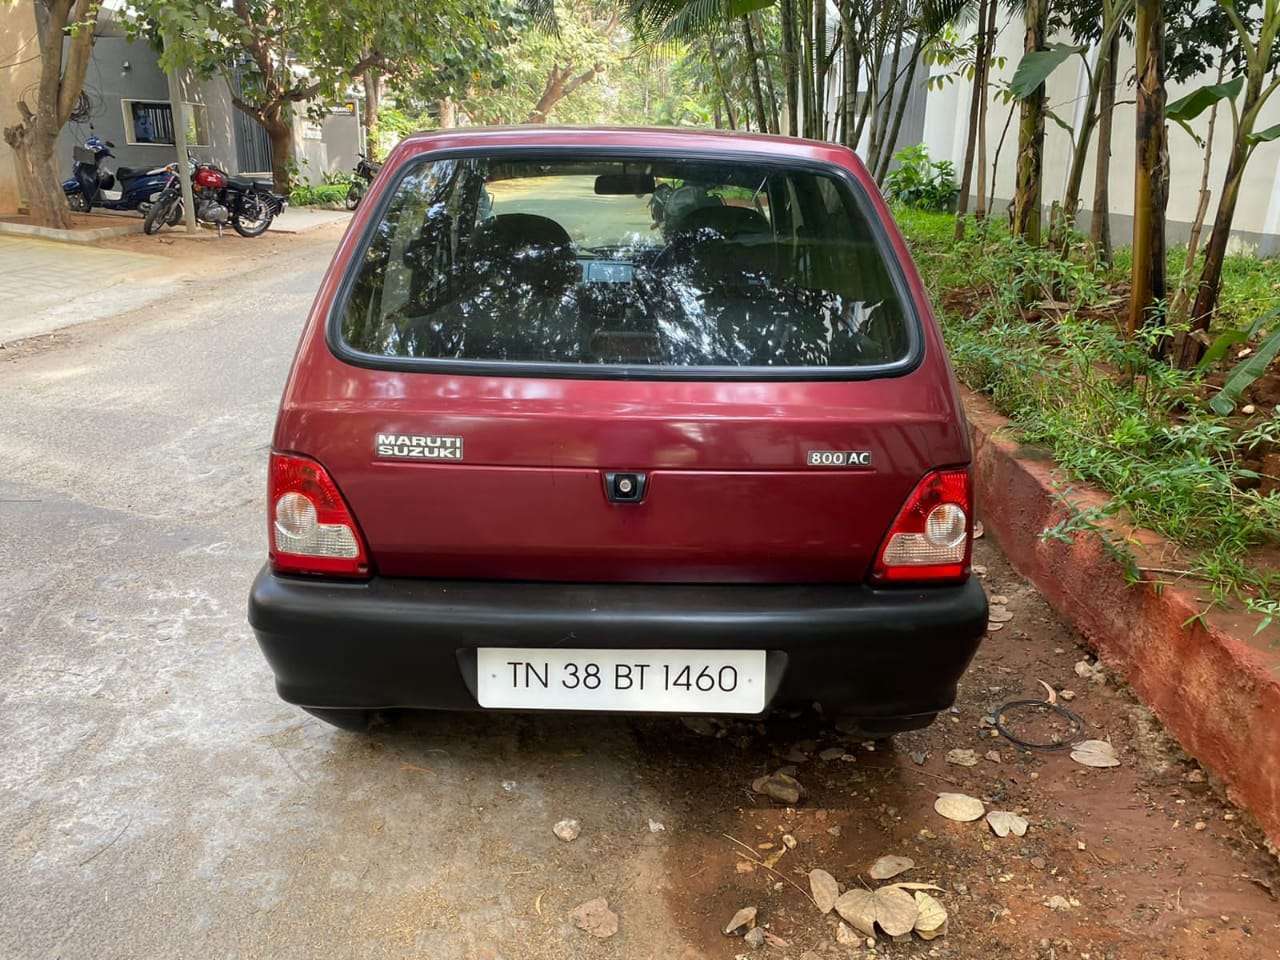 2927-for-sale-Maruthi-Suzuki-800-Petrol-First-Owner-2013-TN-registered-rs-195000